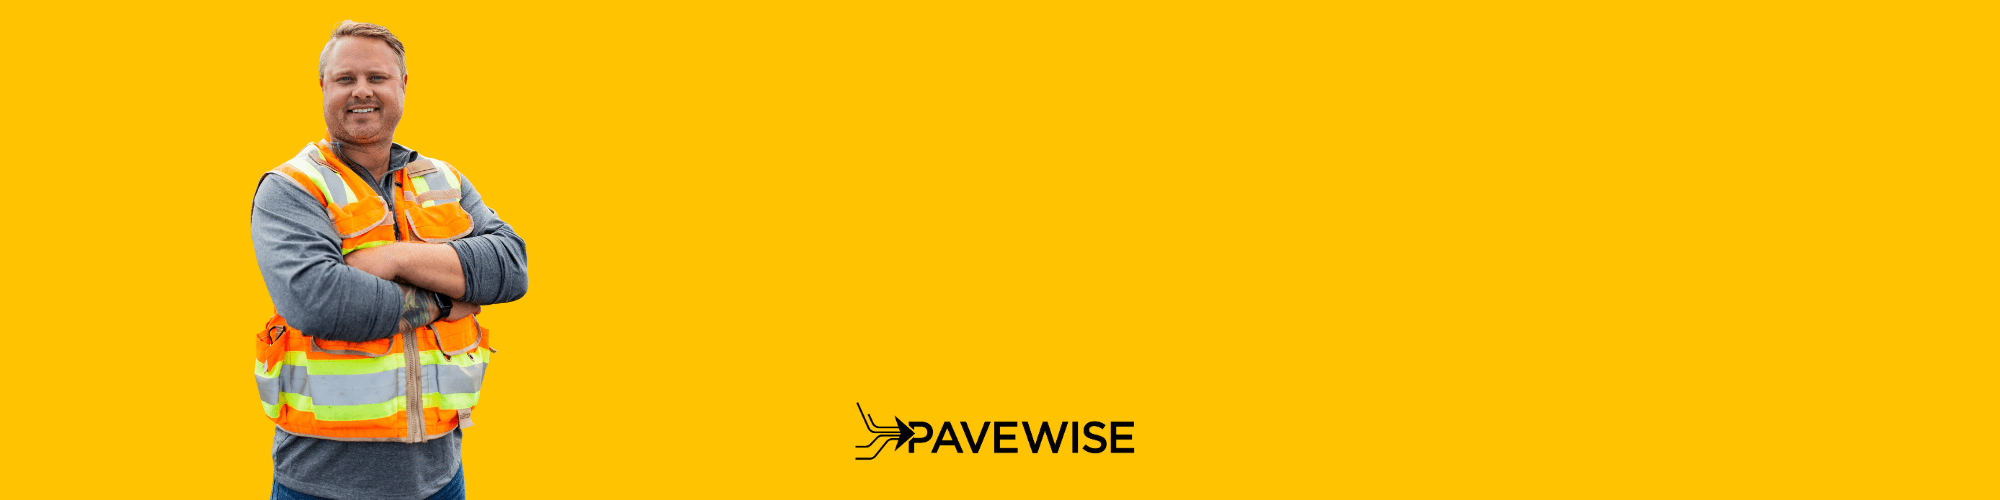 Wild Business Growth Podcast: Bryce Wuori – Construction Meteorologist, Co-Founder of Pavewise